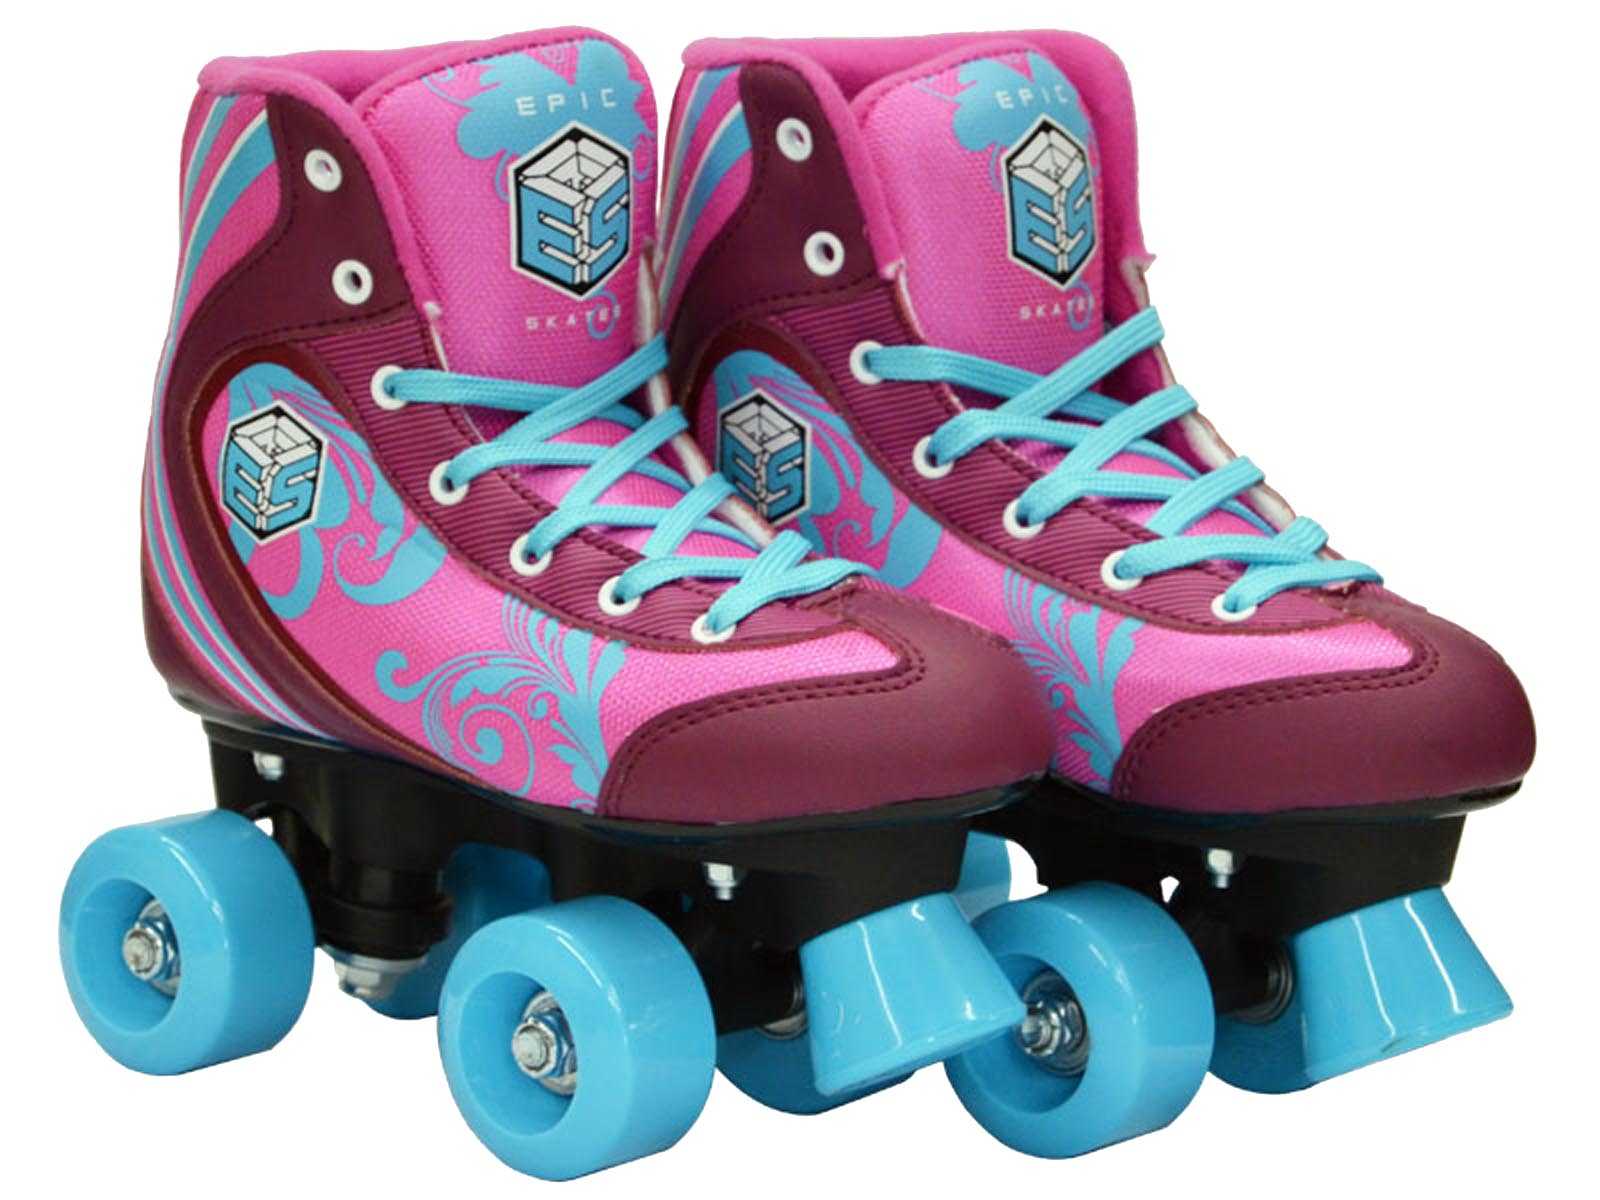 Epic Cotton Candy Roller Skates Package – LowPriceSkates.com